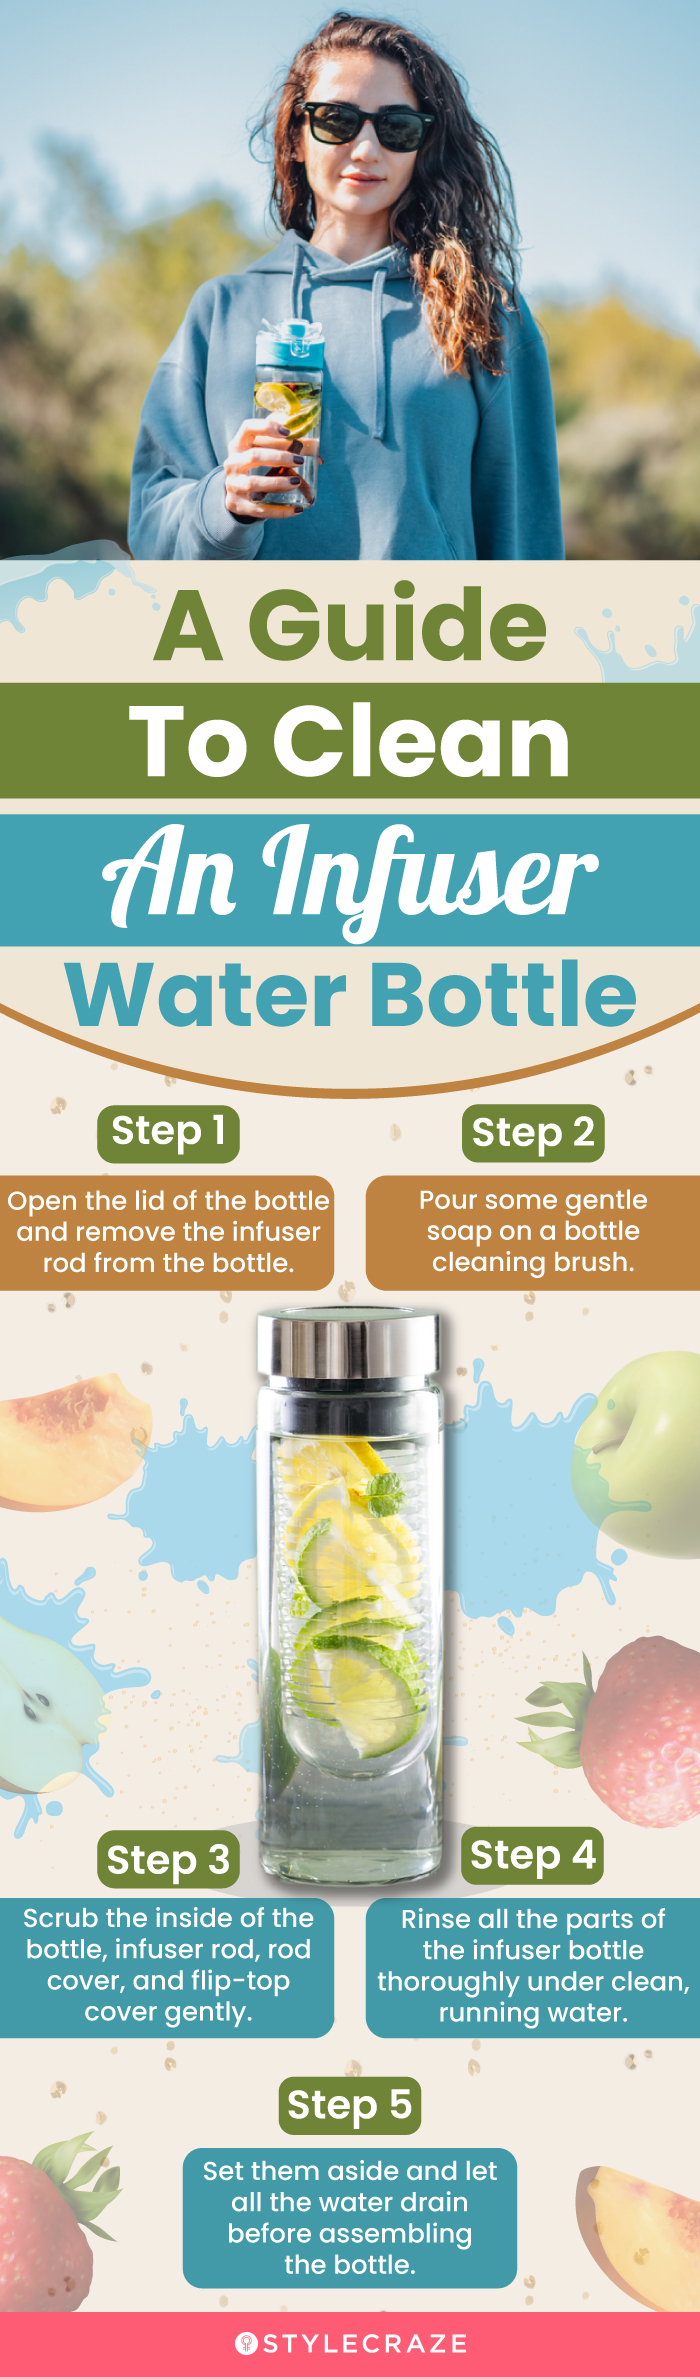 Best Fruit Infused Water Bottles Guide Review - Go Green Travel Green